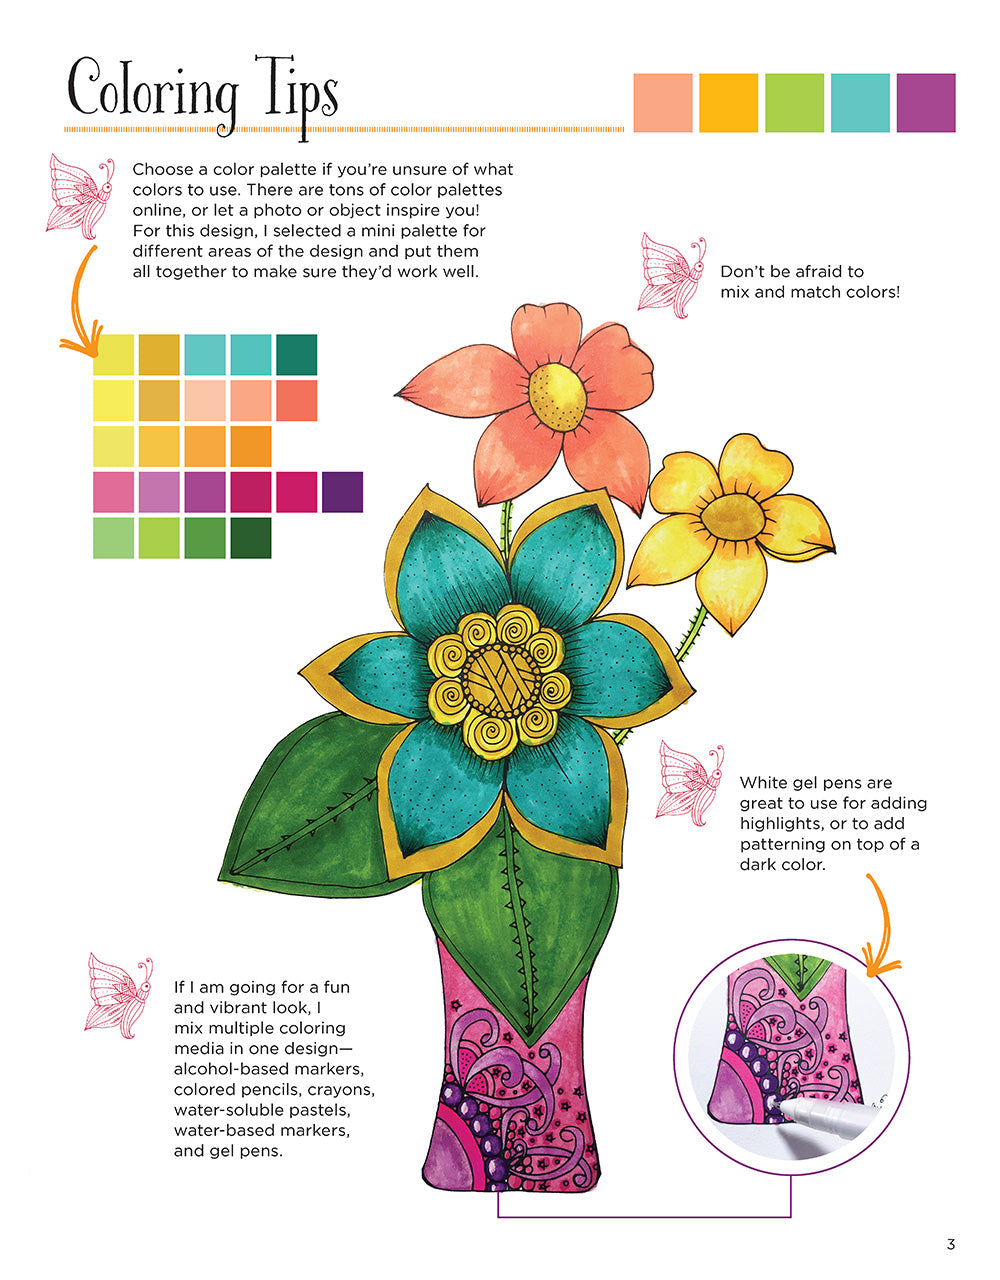 Best Floral Watercolor Coloring Book for Adults 